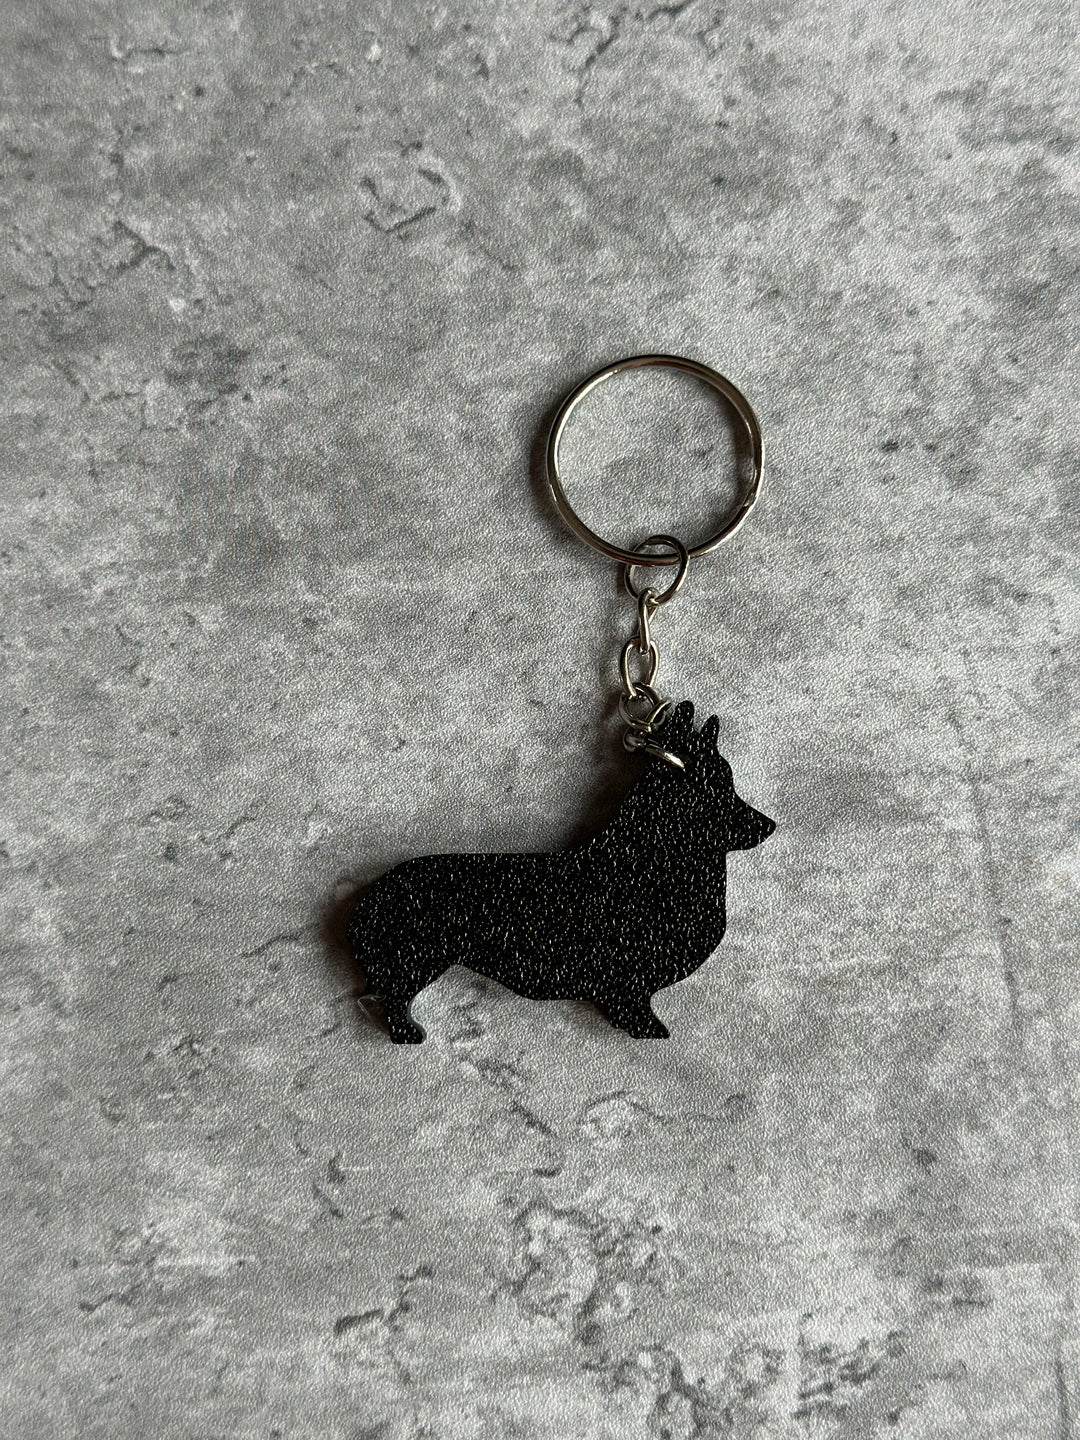 Dachshund Dog Keyring Stl File | 3D Printed | Unique Personalised Gifts